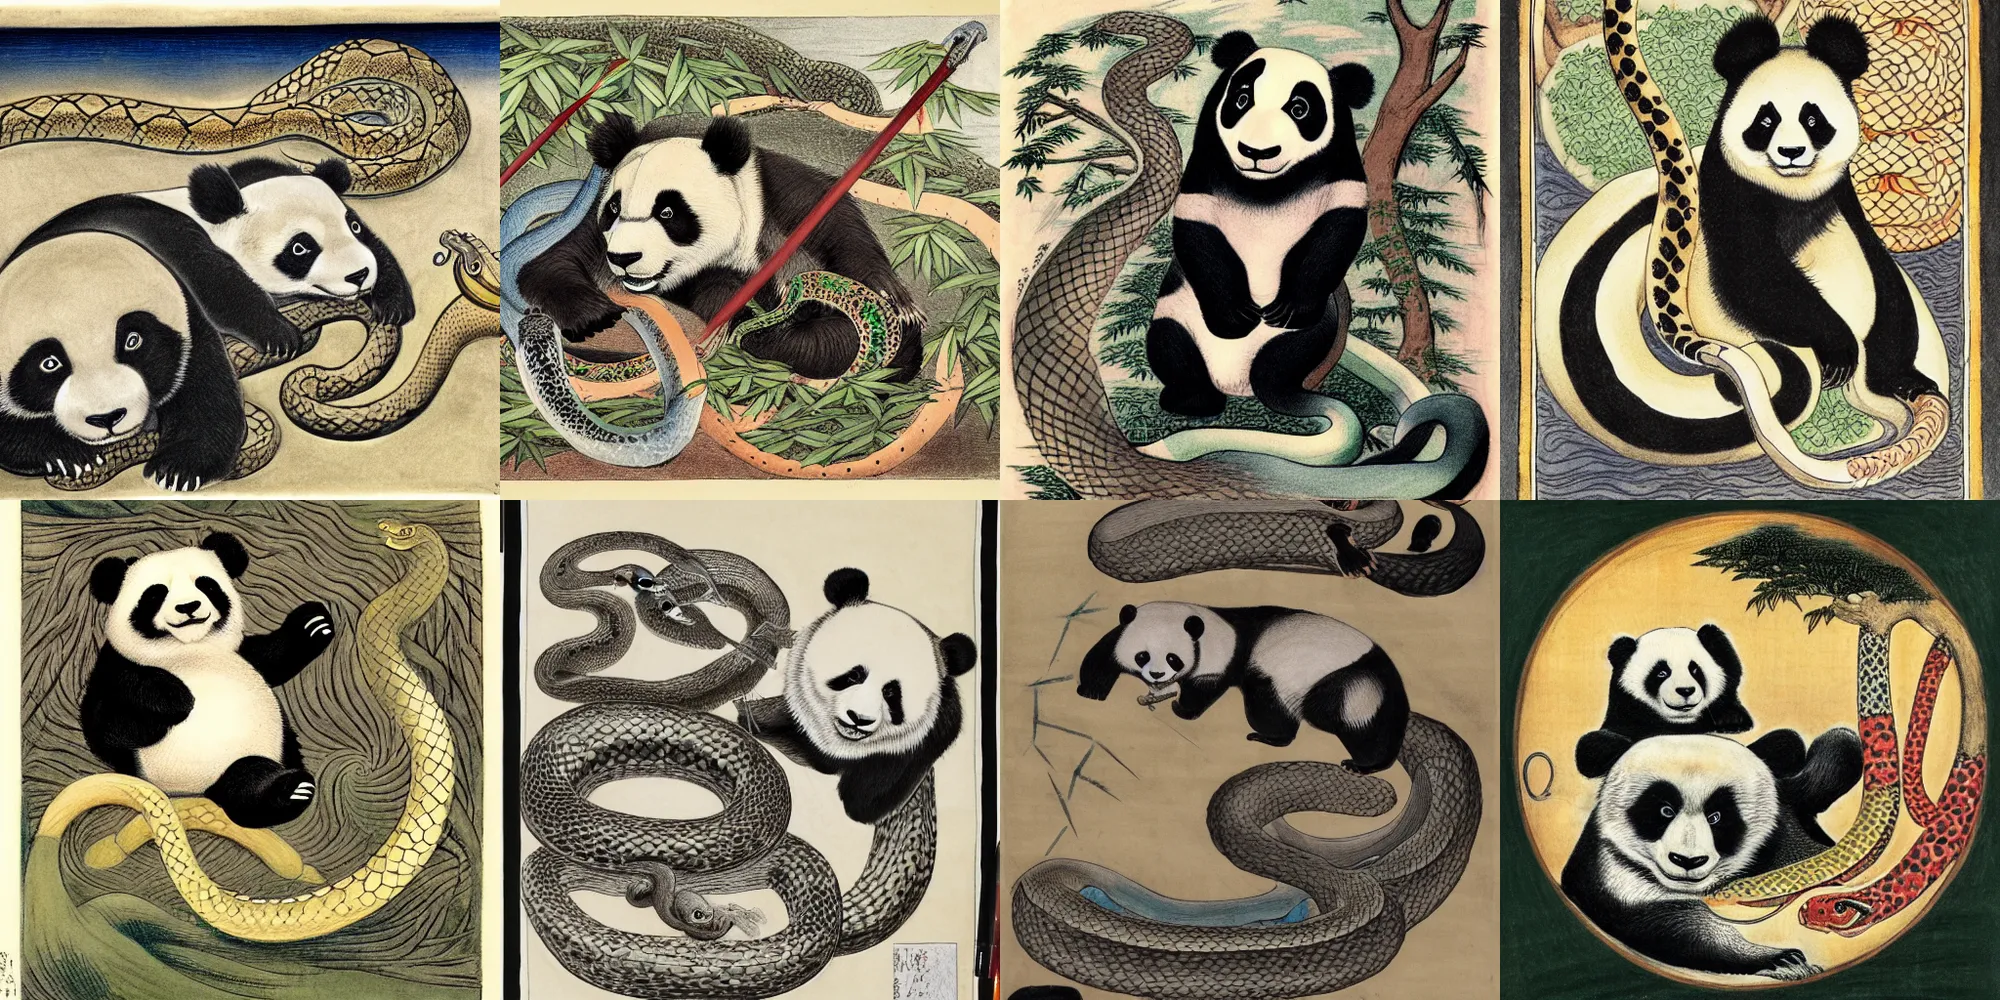 Prompt: drawing of a panda with snake, by william blake, by hokusai, by todd schorr, by mark ryden, by john tenniel